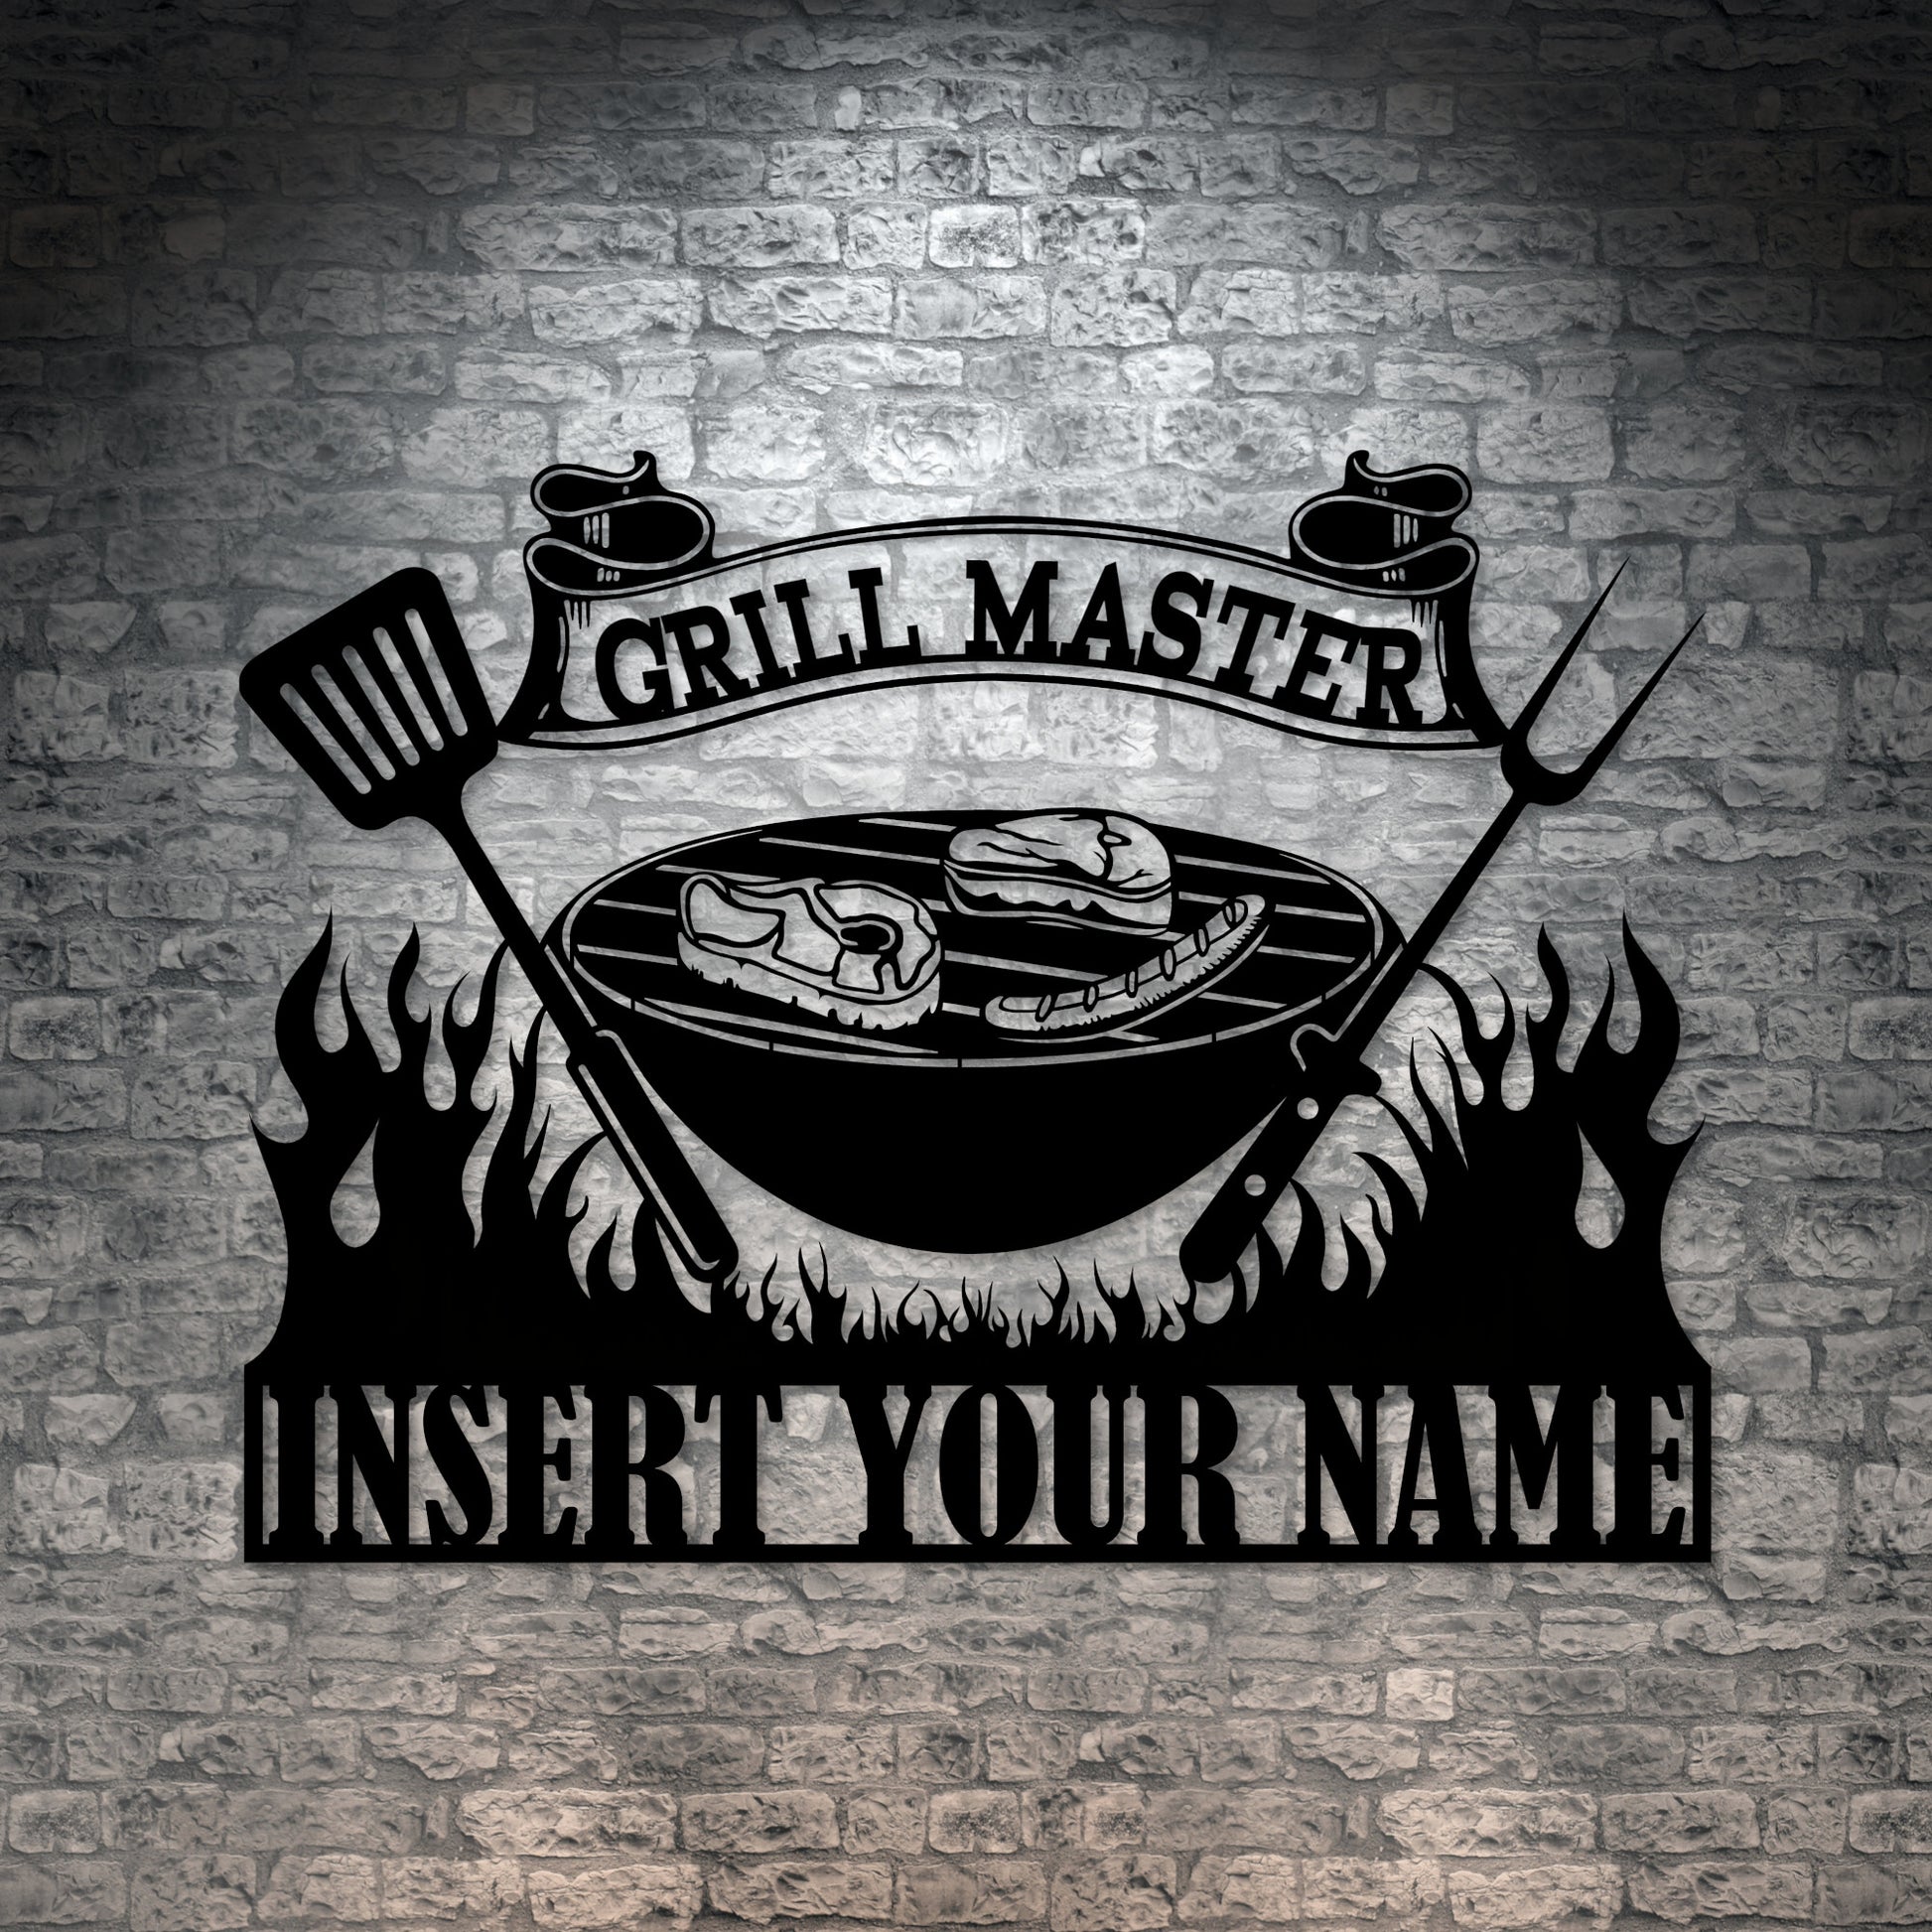 Grill Personalized Name Metal Sign. Custom Grillmaster Steel Sign Monogram Gift. Personal Grill Steel Sign. BBQ Monogram Display For Father